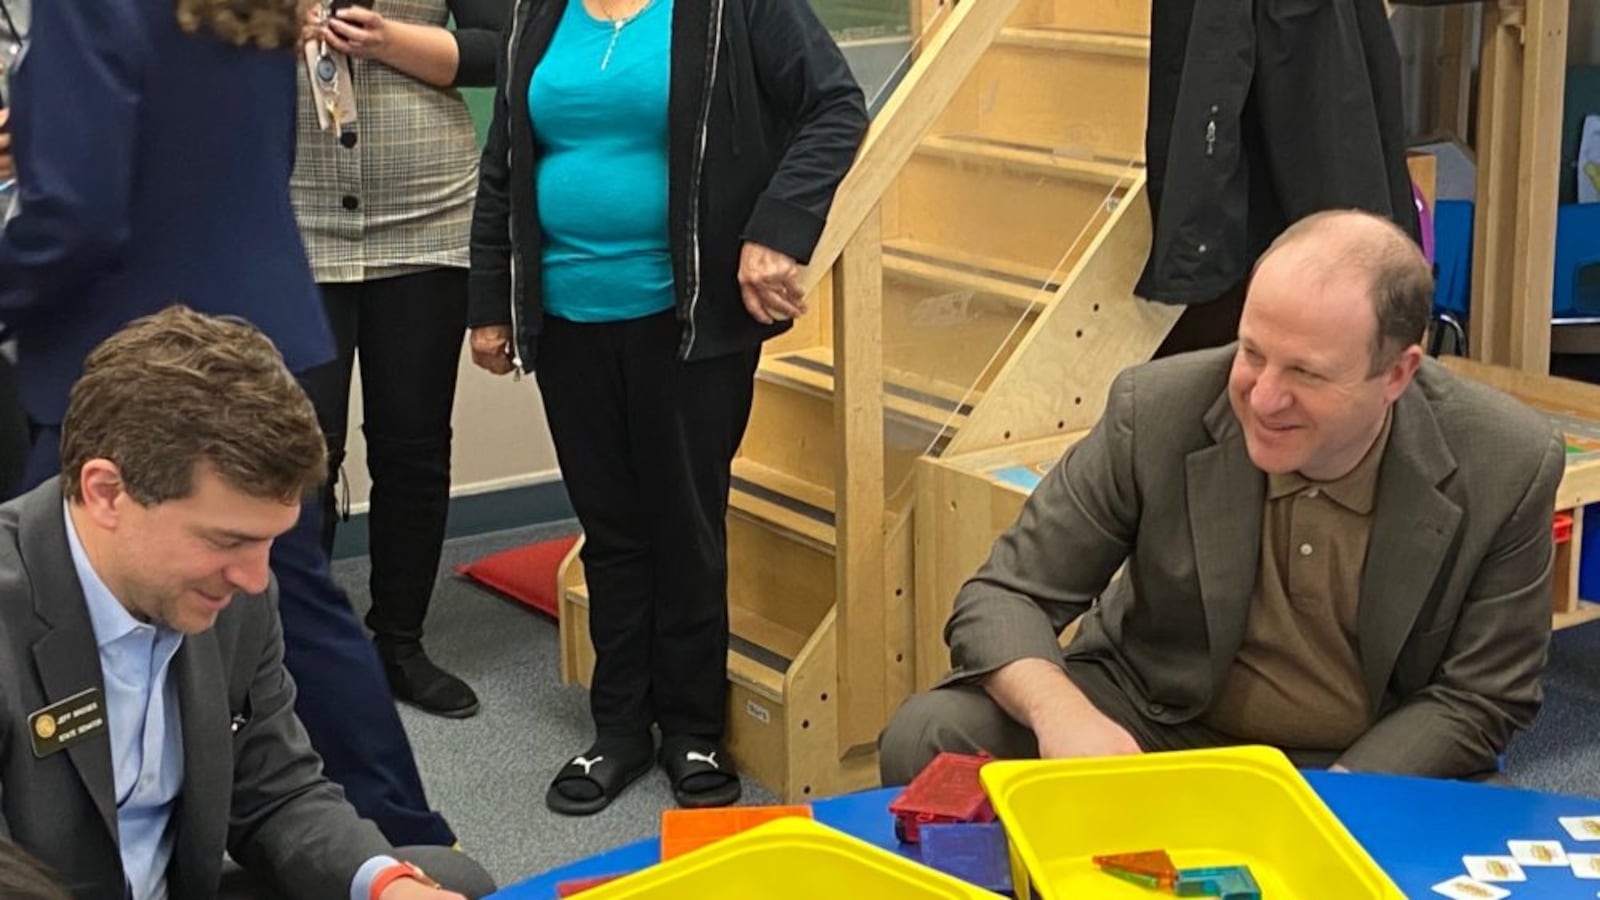 State Sen. Jeff Bridges and Gov. Jared Polis play with geometric tiles on a visit to Village for Early Childhood Education at North.